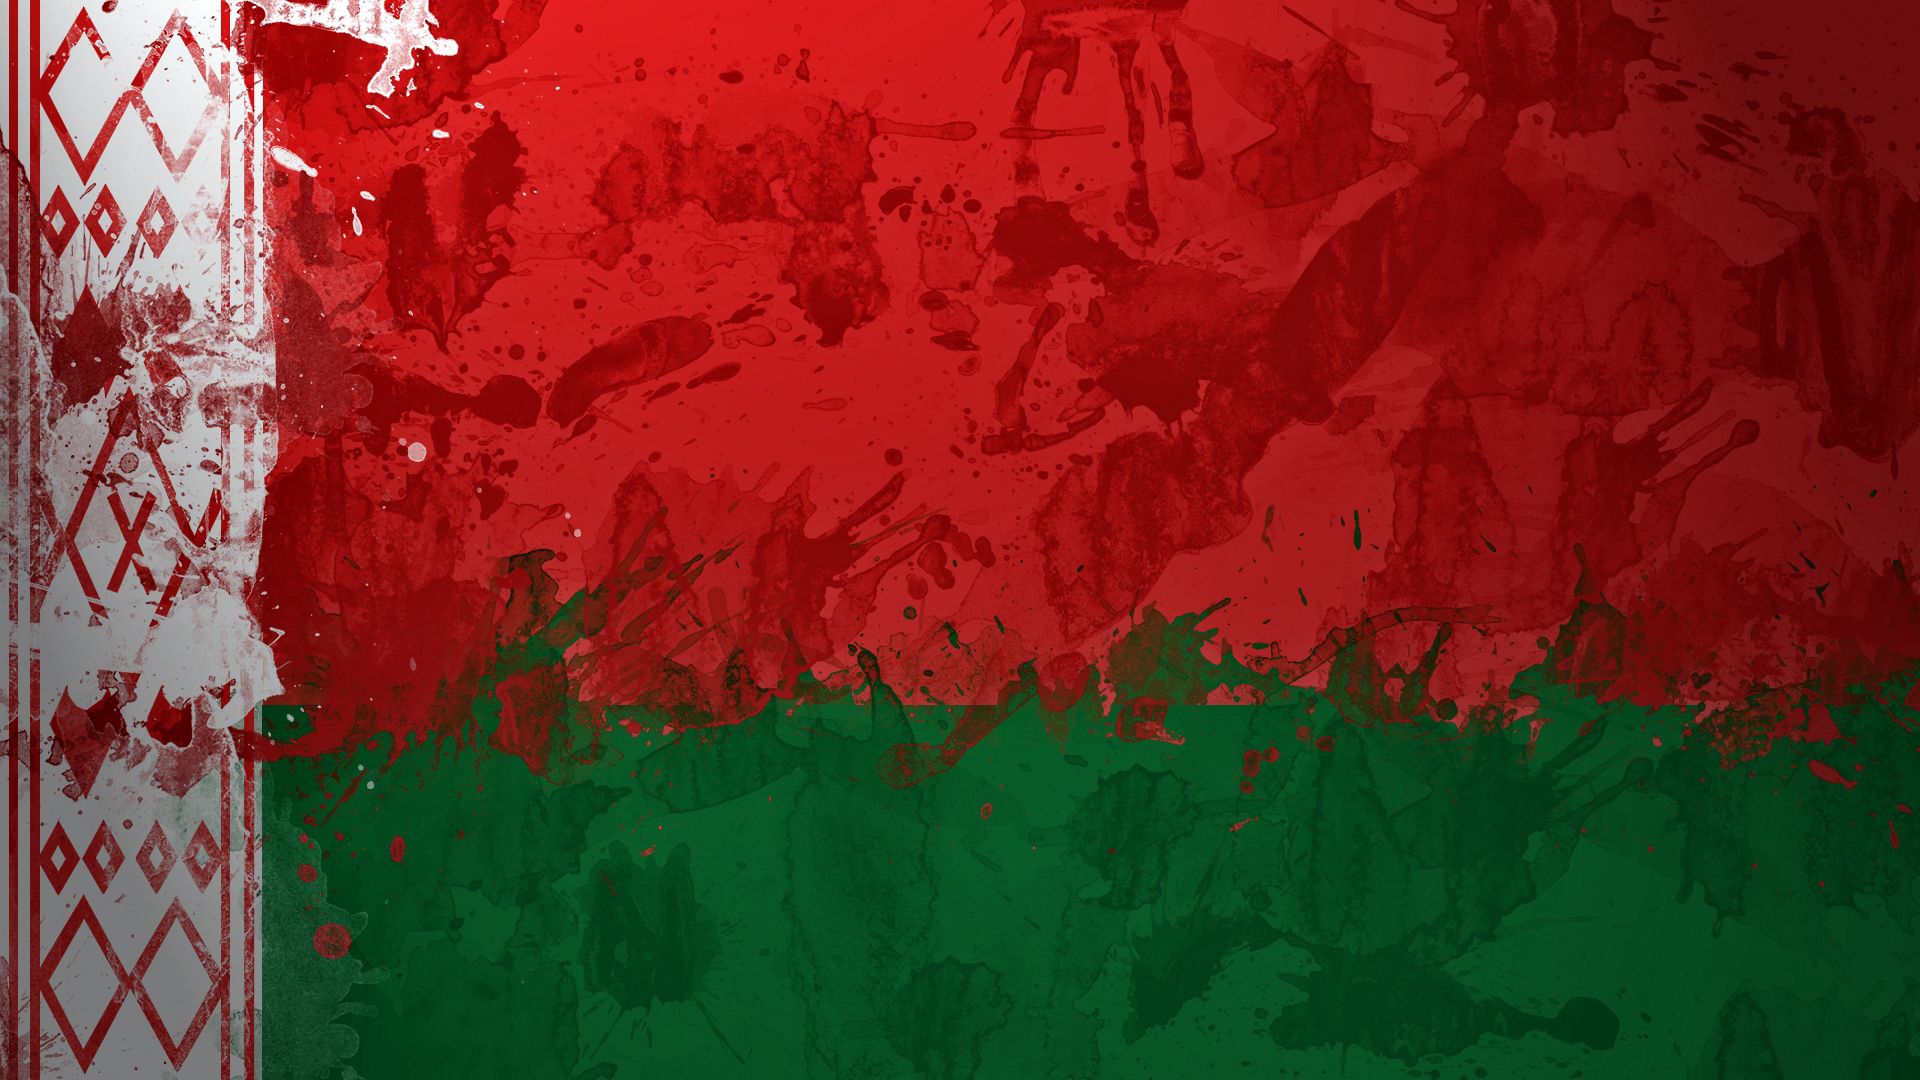 Full HD stains, background, texture, textures, paint, wall, spots, flag, belarus